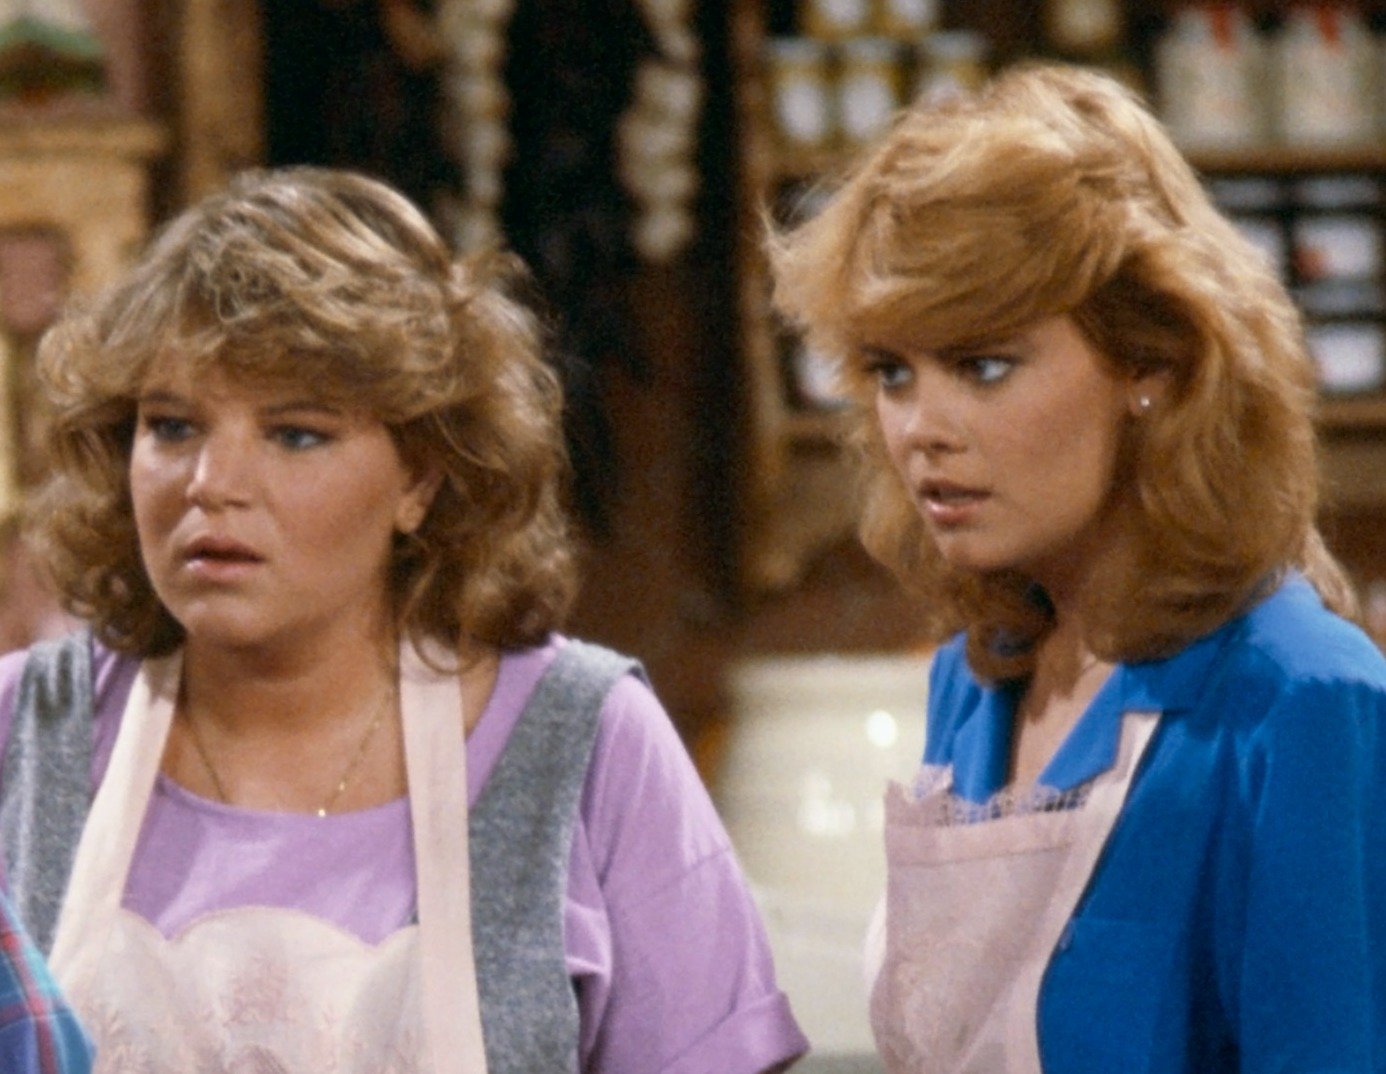 Mindy Cohn and Lisa Welchel on the set of the series The Facts of Life.